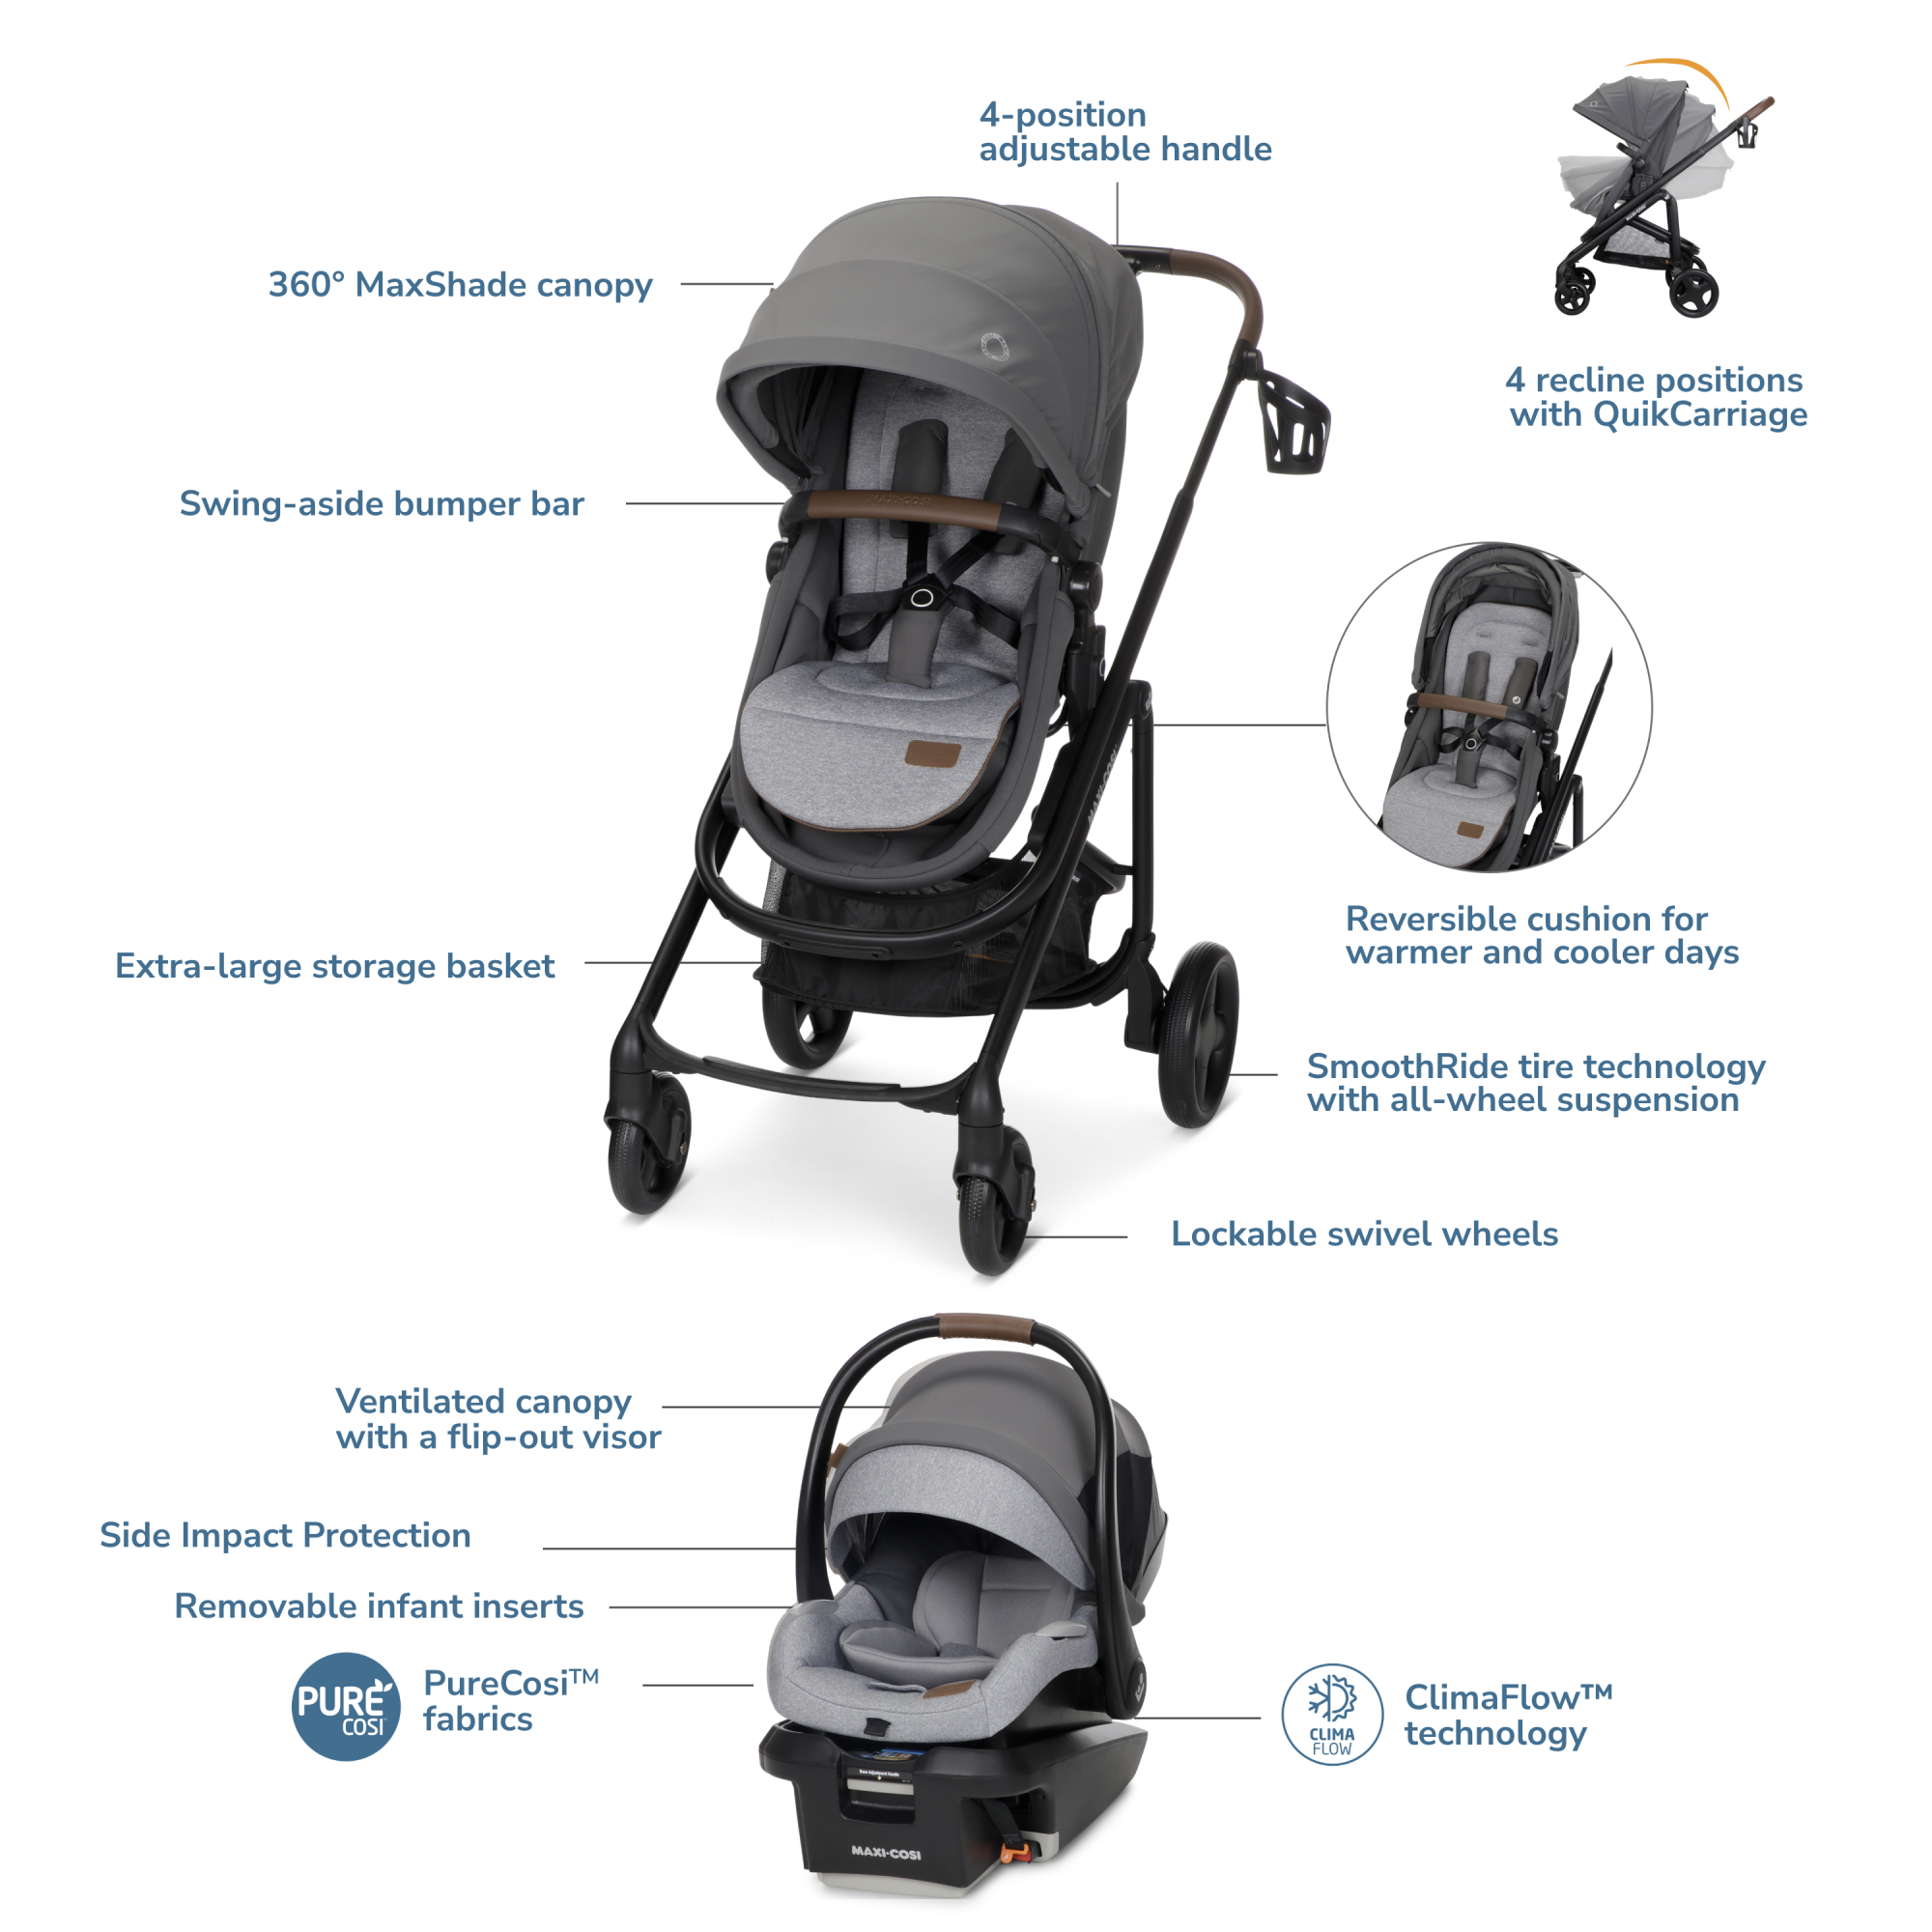 Tayla™ Max Travel System infographic: 4-position adjustable handle; 360 degree Max Shade canopy; 4 recline positions with QuikCarriage; Swing-aside bumper bar; Extra-large storage basket; Ventilated canopy with a flip-out visor; Side impact protection; Removable infant inserts; PureCosi fabrics; ClimaFlow technology; Lockable swivel wheels; SmoothRide tire technology with all-wheel suspension; Reversible cushion for warmer and cooler days